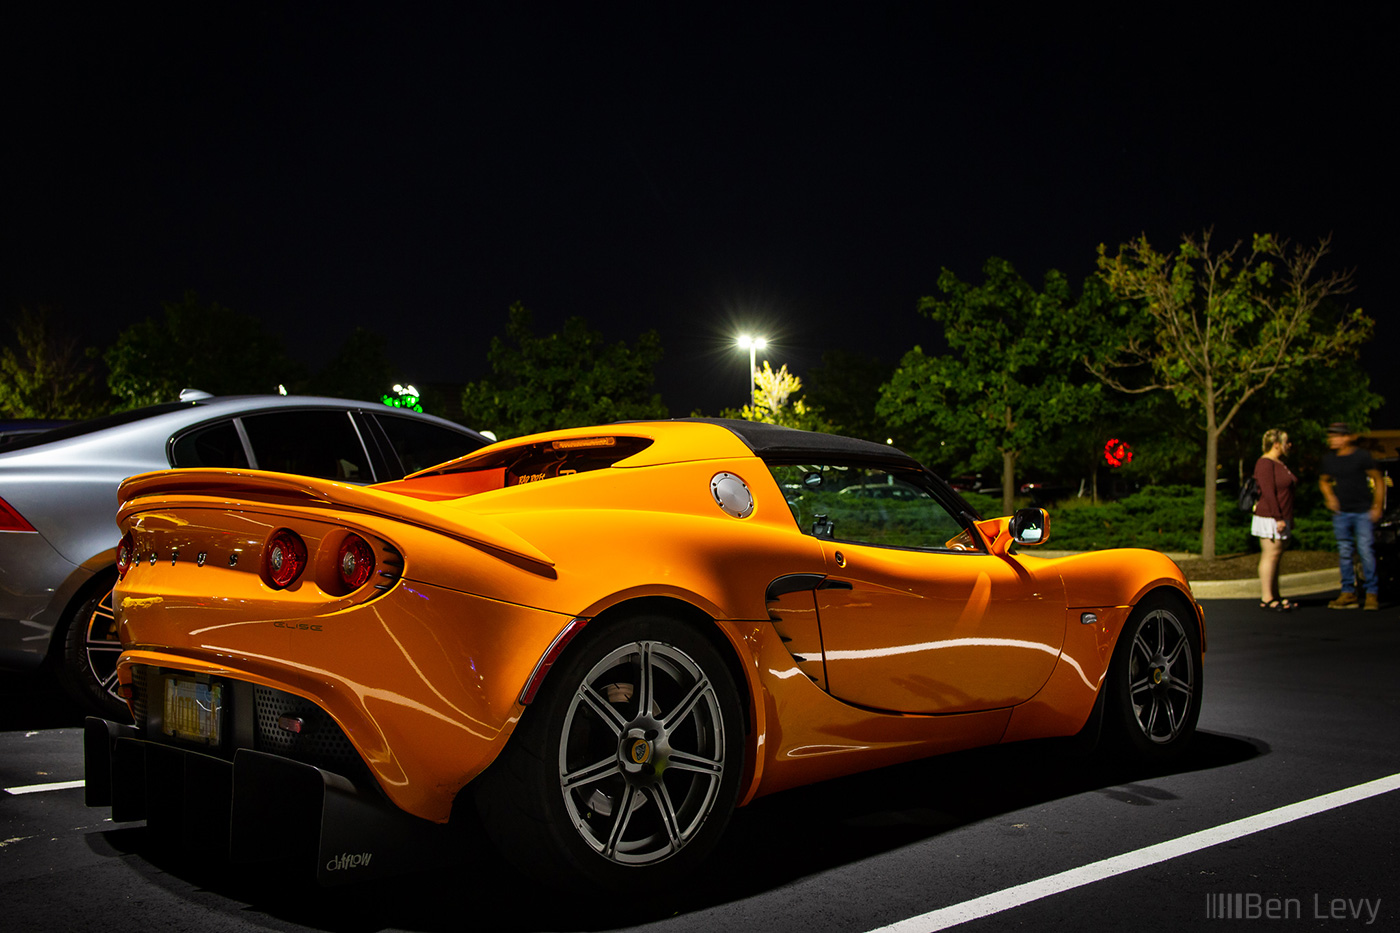 Orang Lotus Elise at Cars and Culture Meet in Warrenville